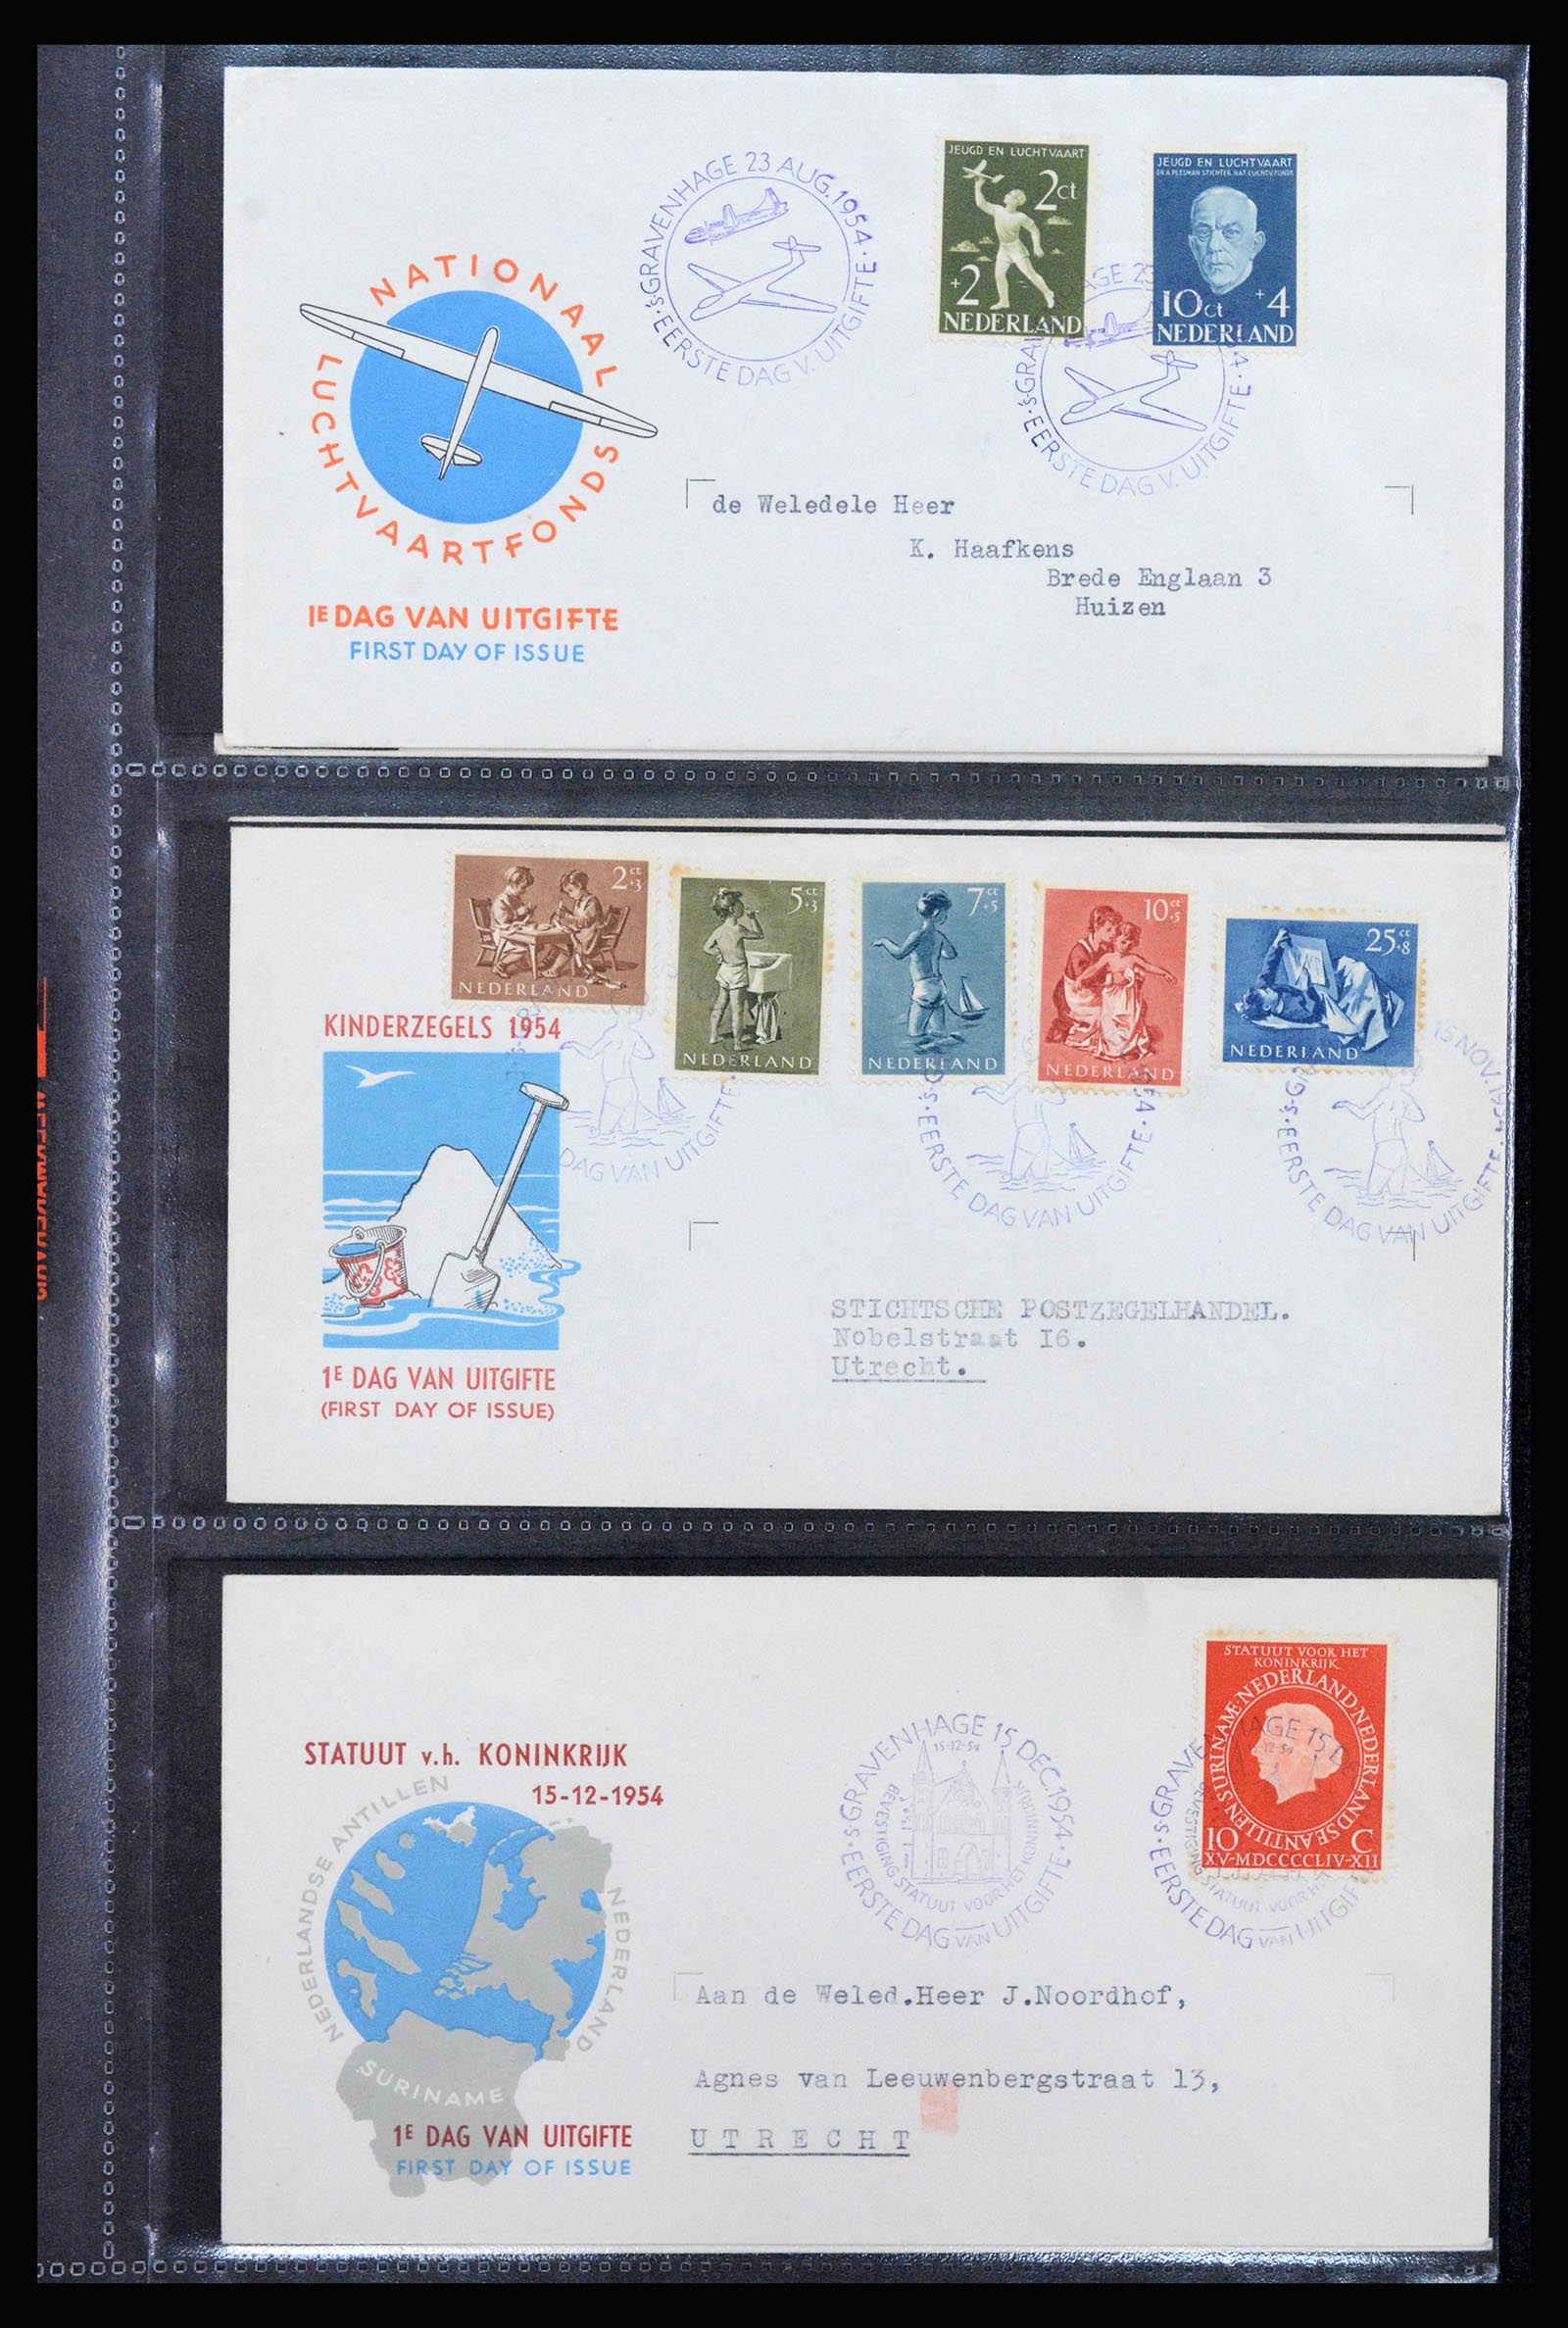 37264 007 - Stamp collection 37264 Netherlands FDC's 1950-1975.